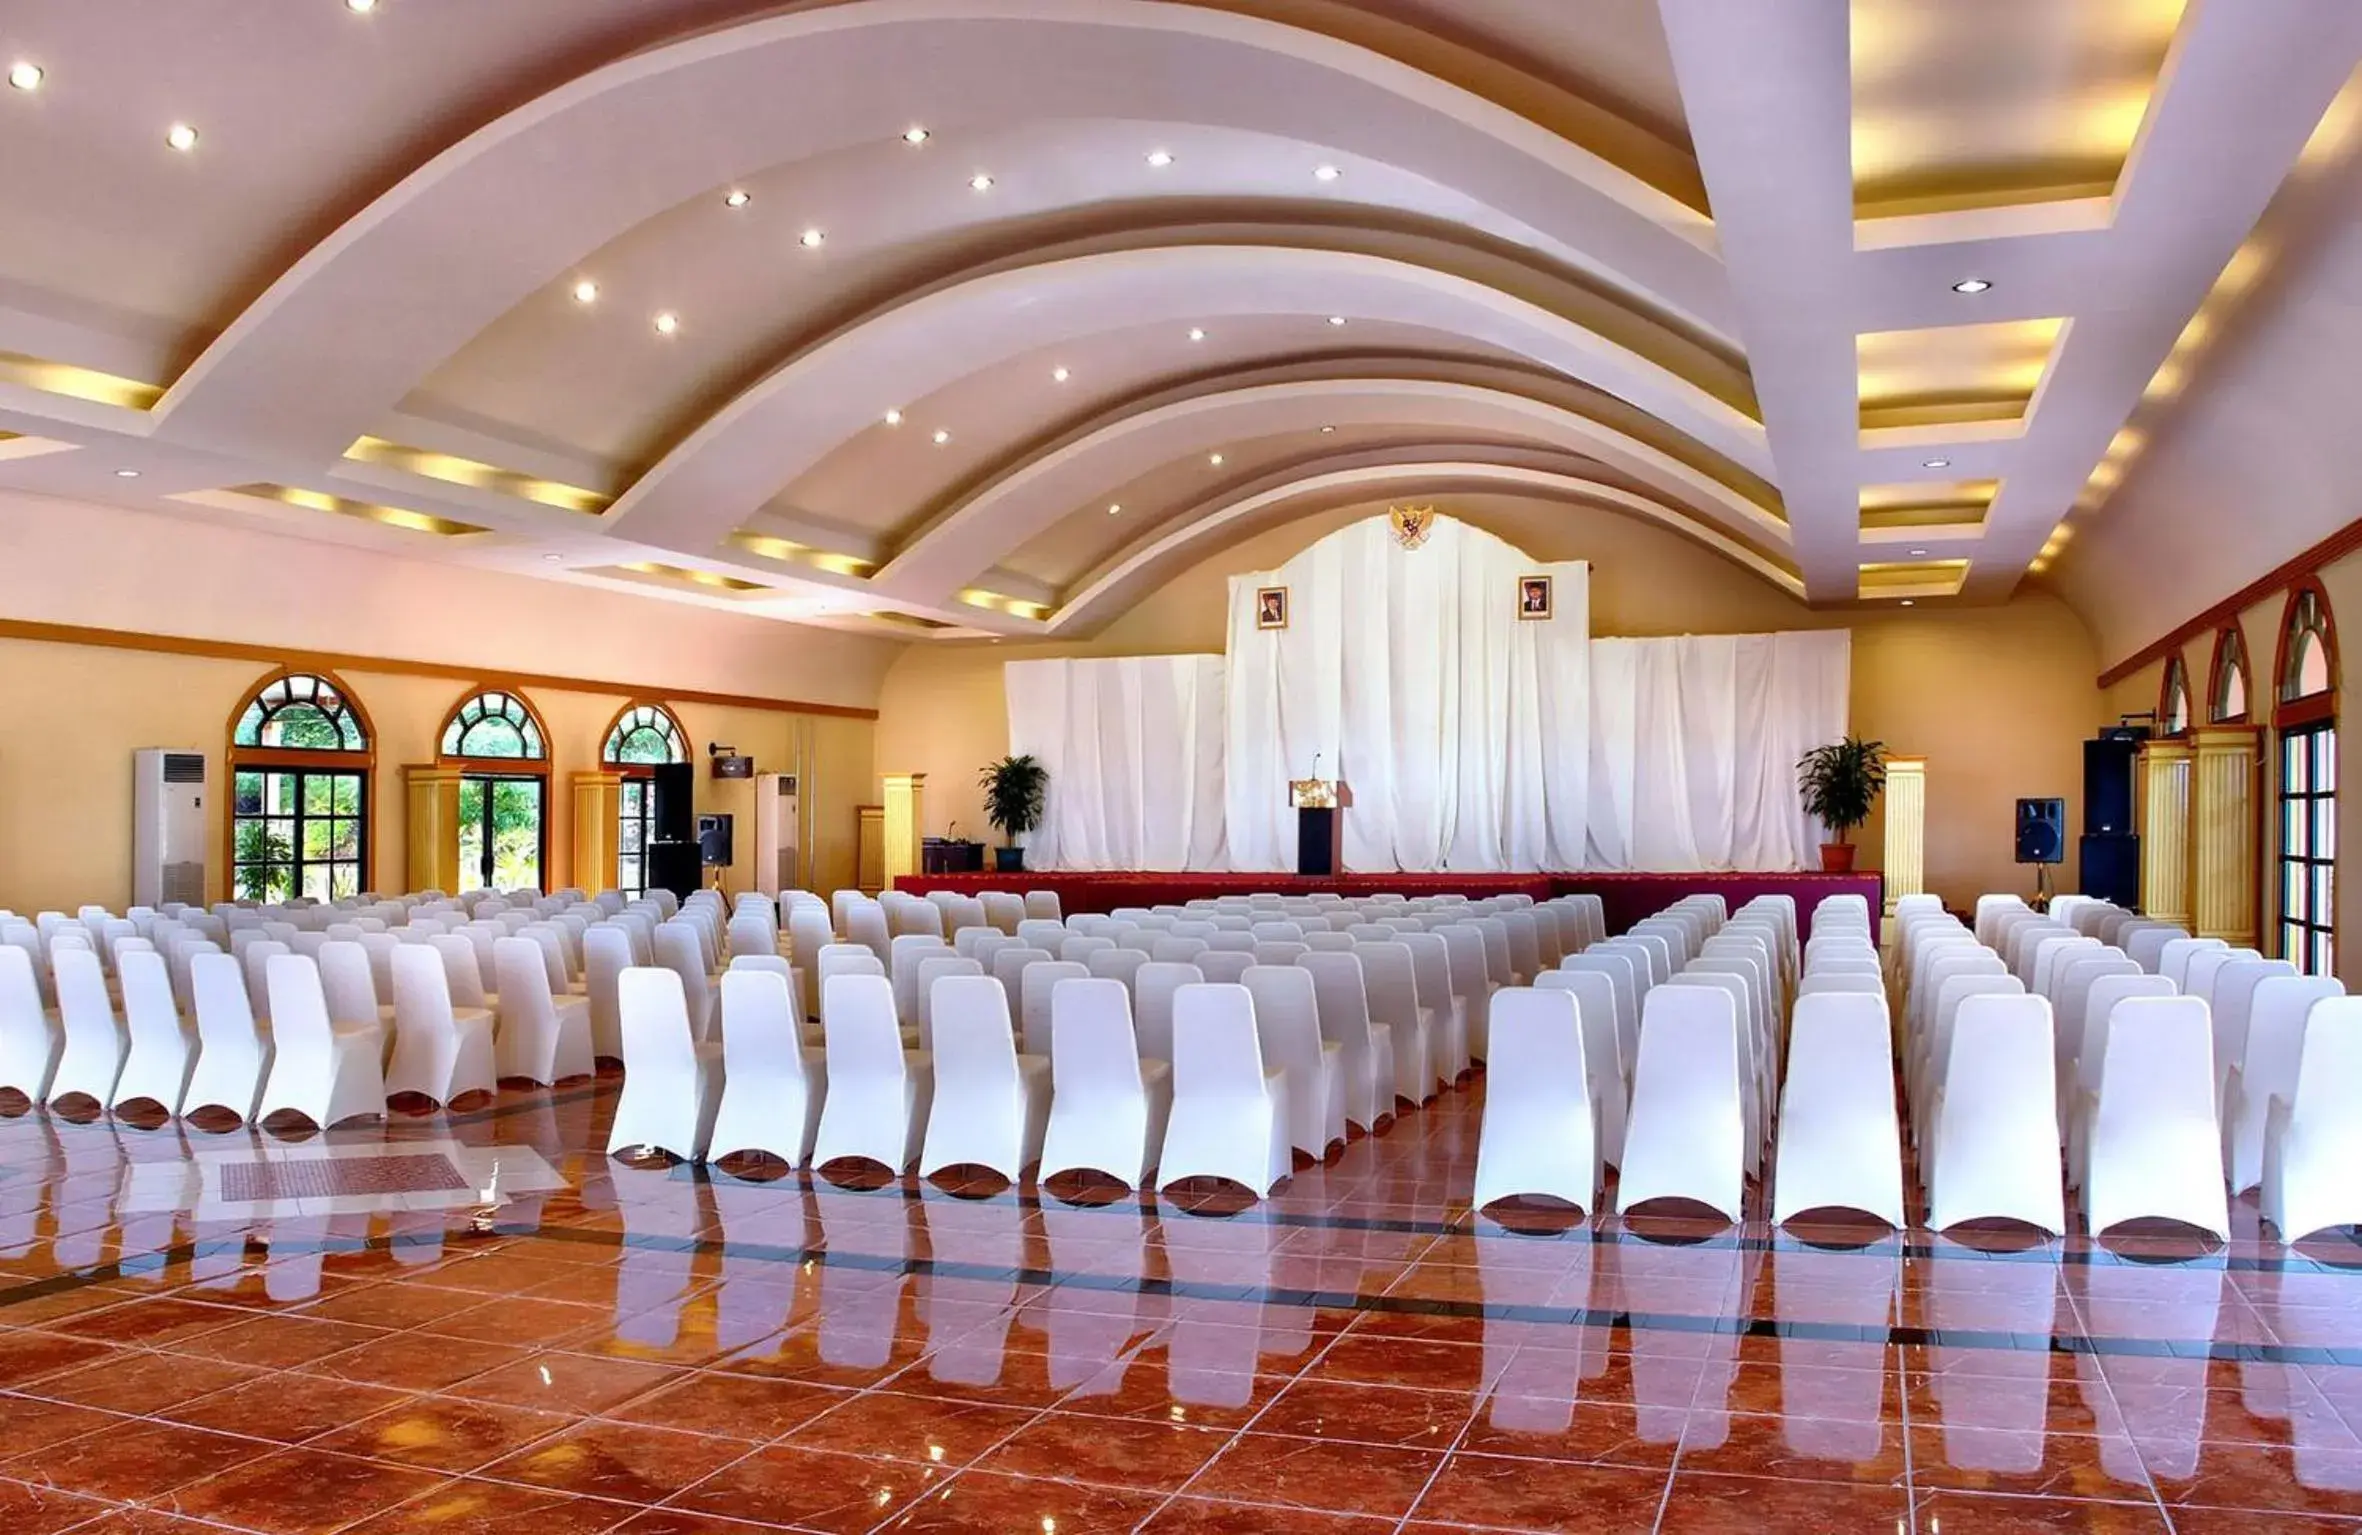 Meeting/conference room, Banquet Facilities in ASTON Niu Manokwari Hotel & Conference Center